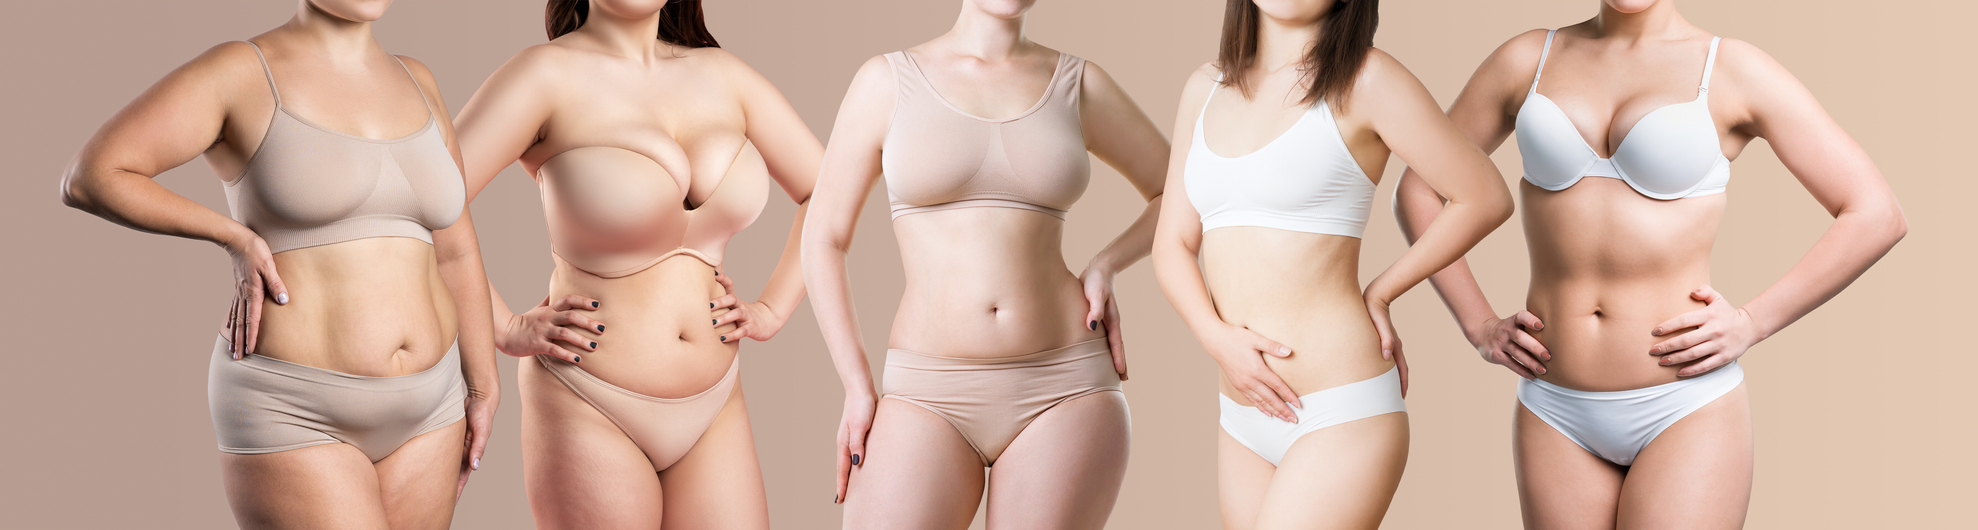 The image shows a group of women all with different body types and asks the question, "what figure can a tummy tuck give me?"